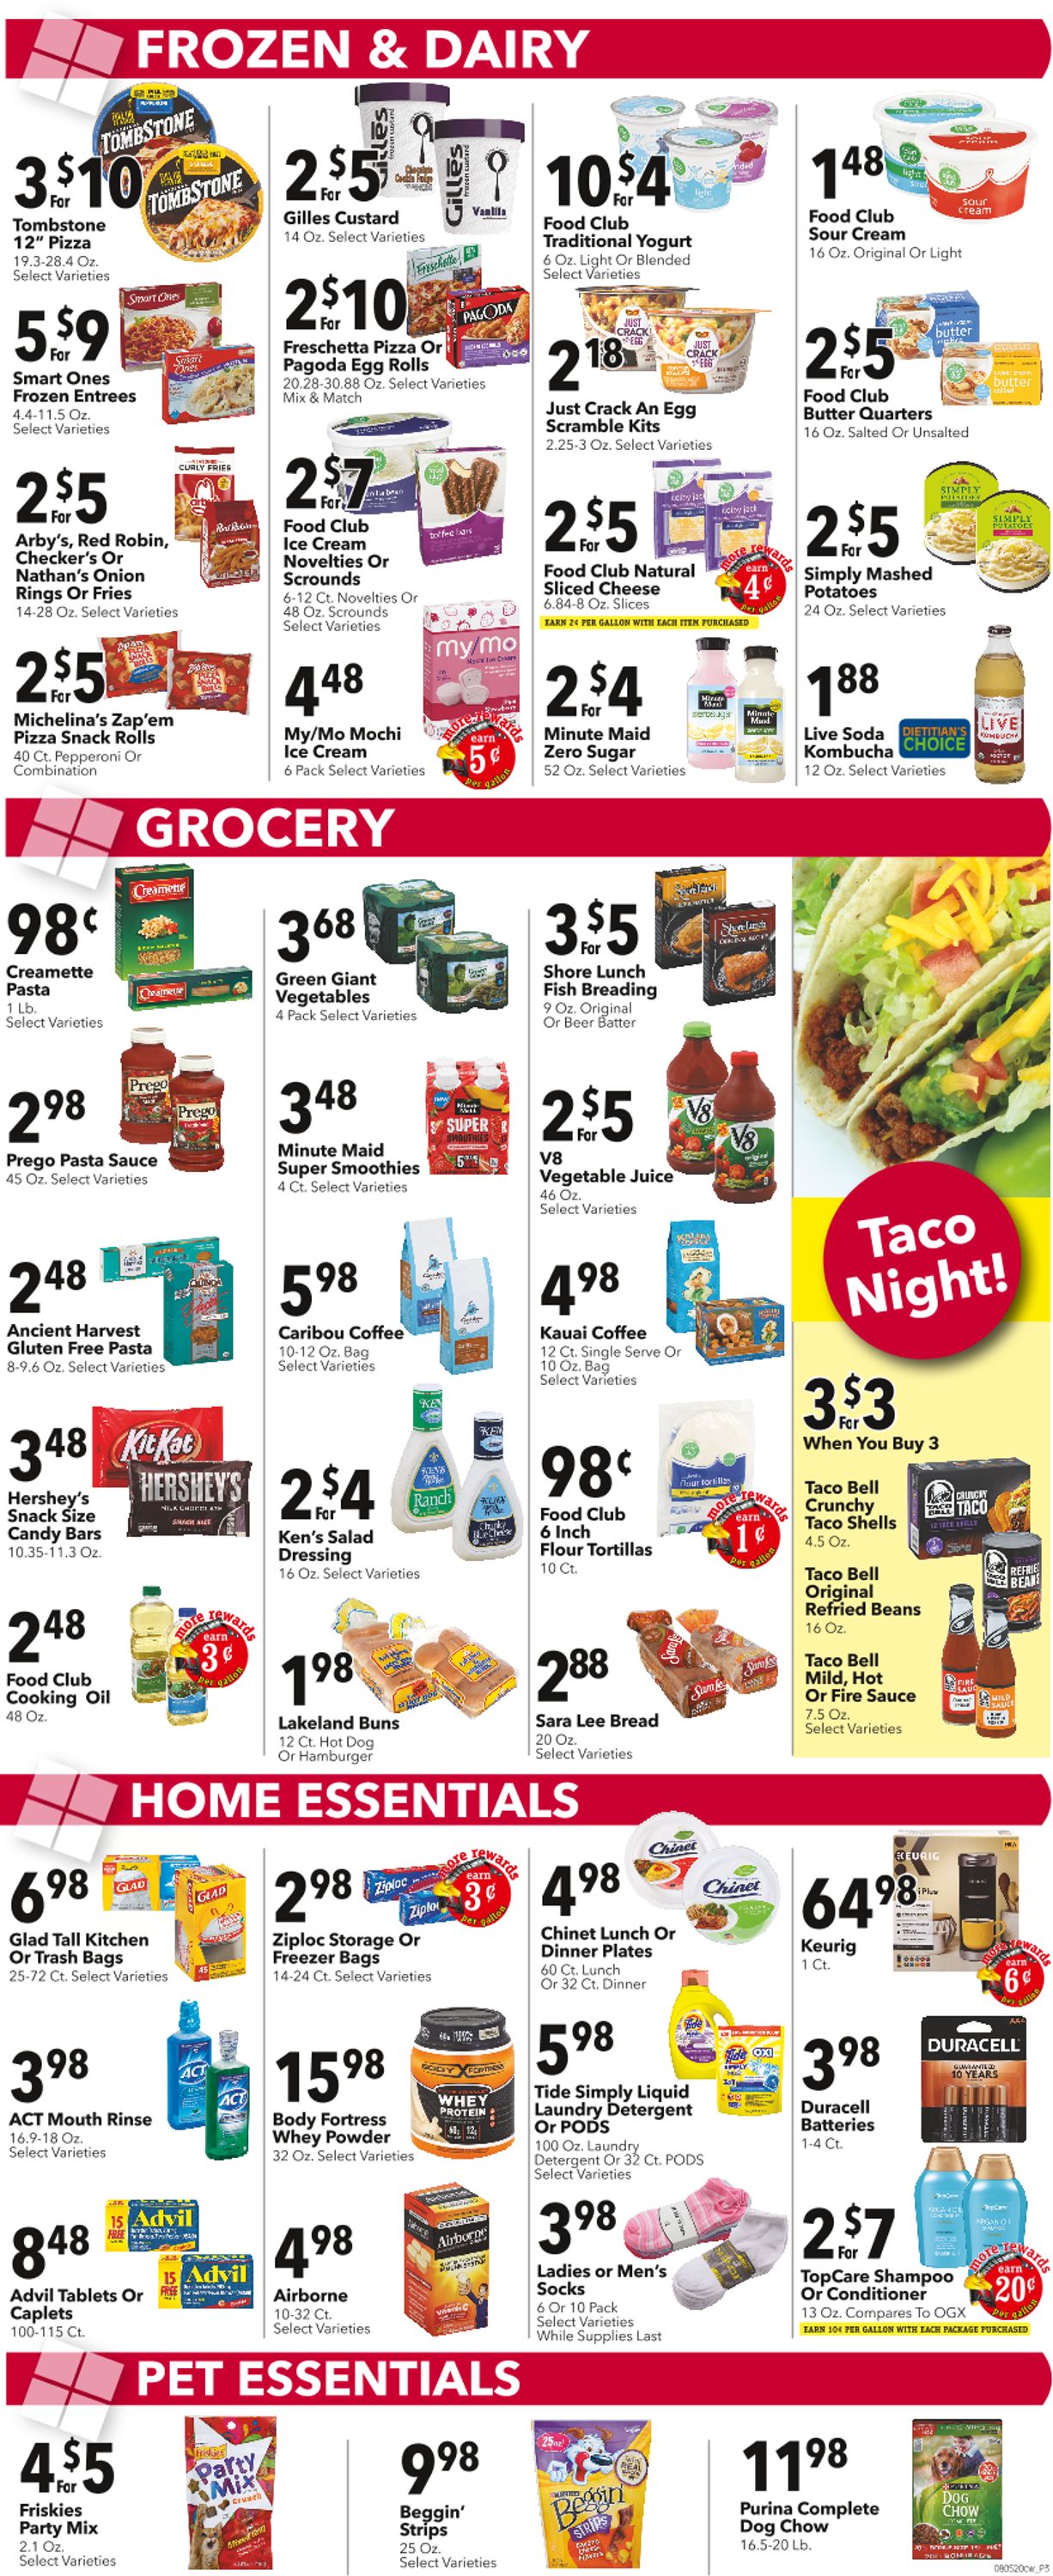 Cash Wise Weekly Ad Circular - valid 08/05-08/11/2020 (Page 3)